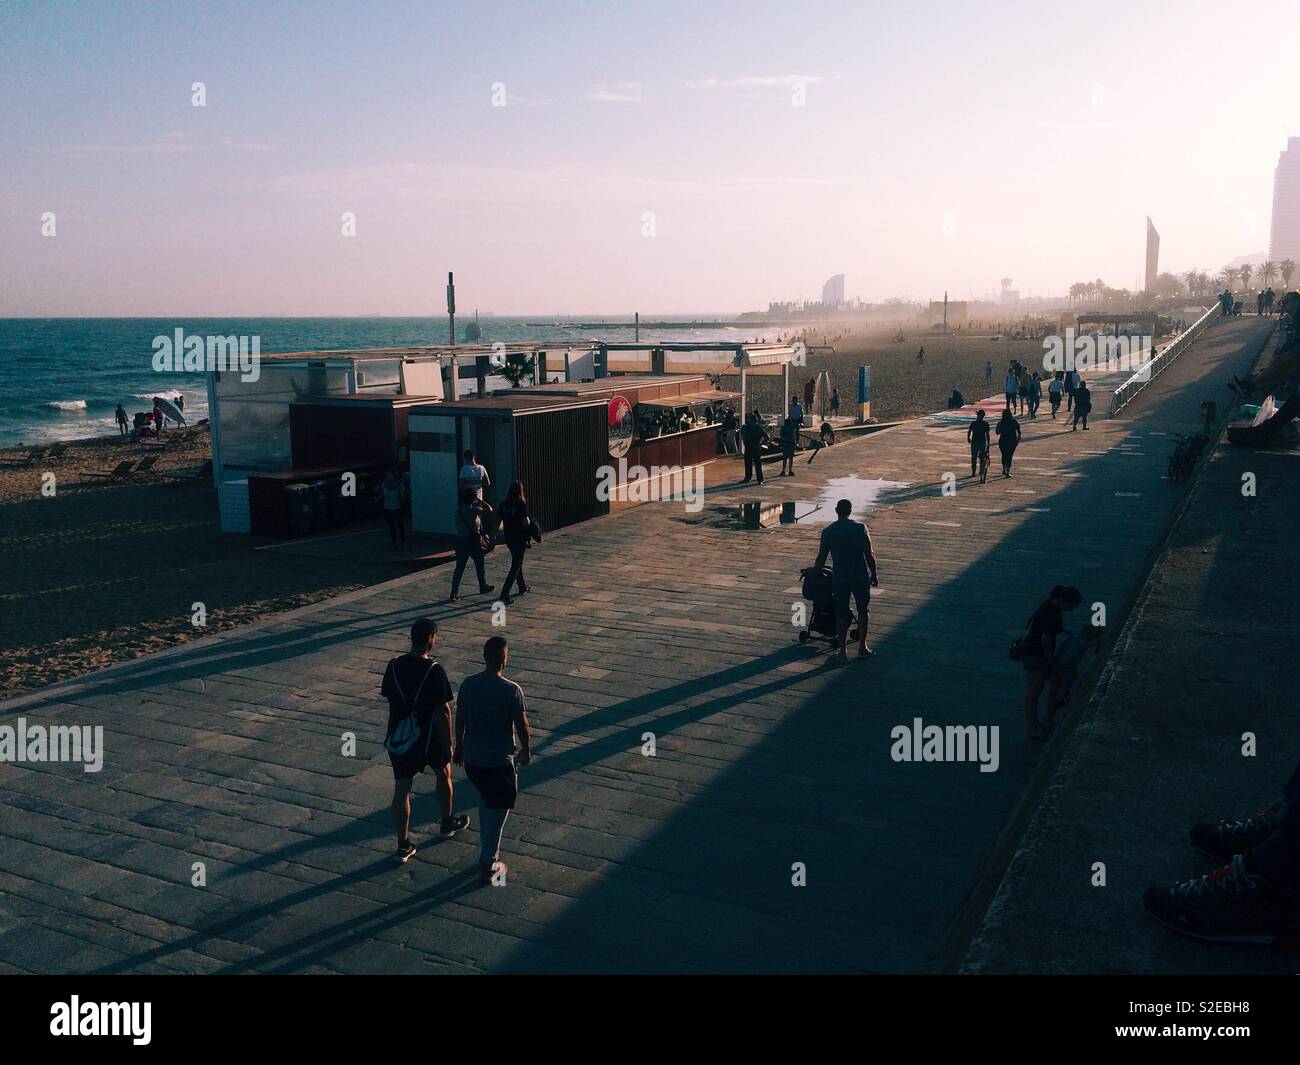 People strolling along the beach promenade at El Poblenou beach in Barcelona Spain enjoying the sunset Stock Photo